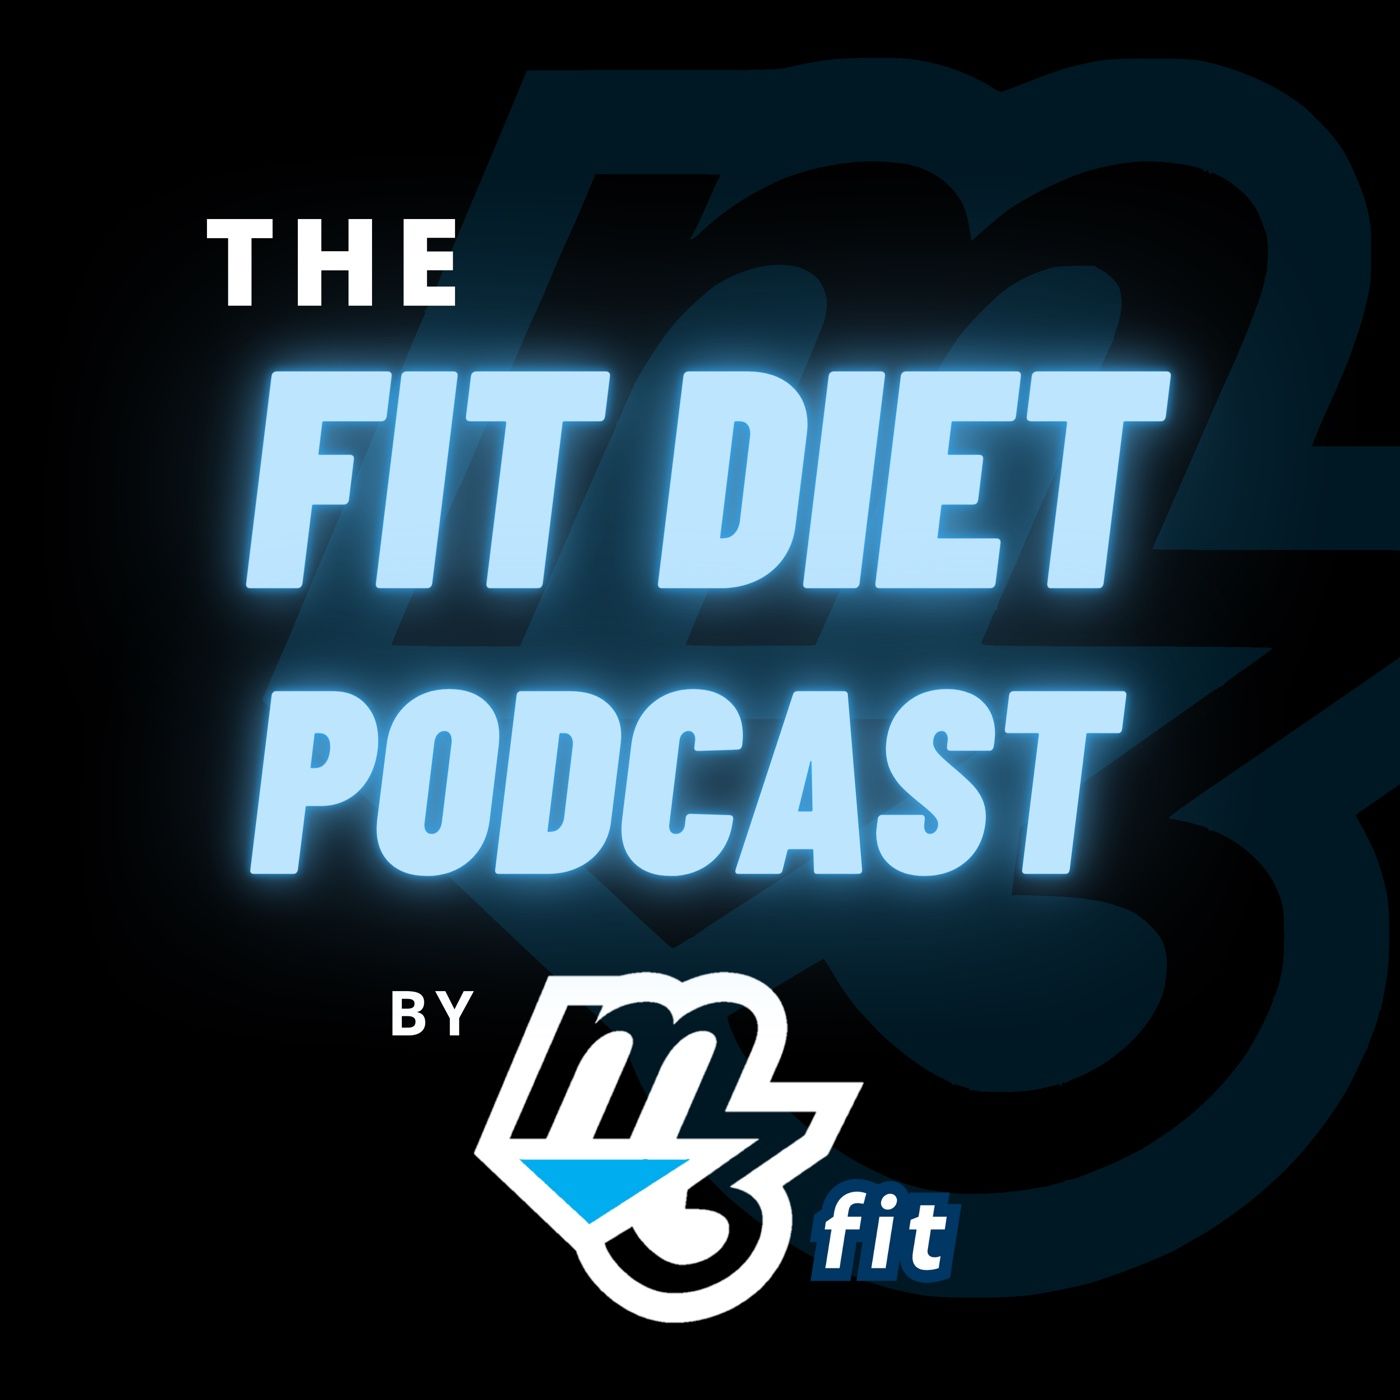 Episode 27 - Fit Diet Podcast